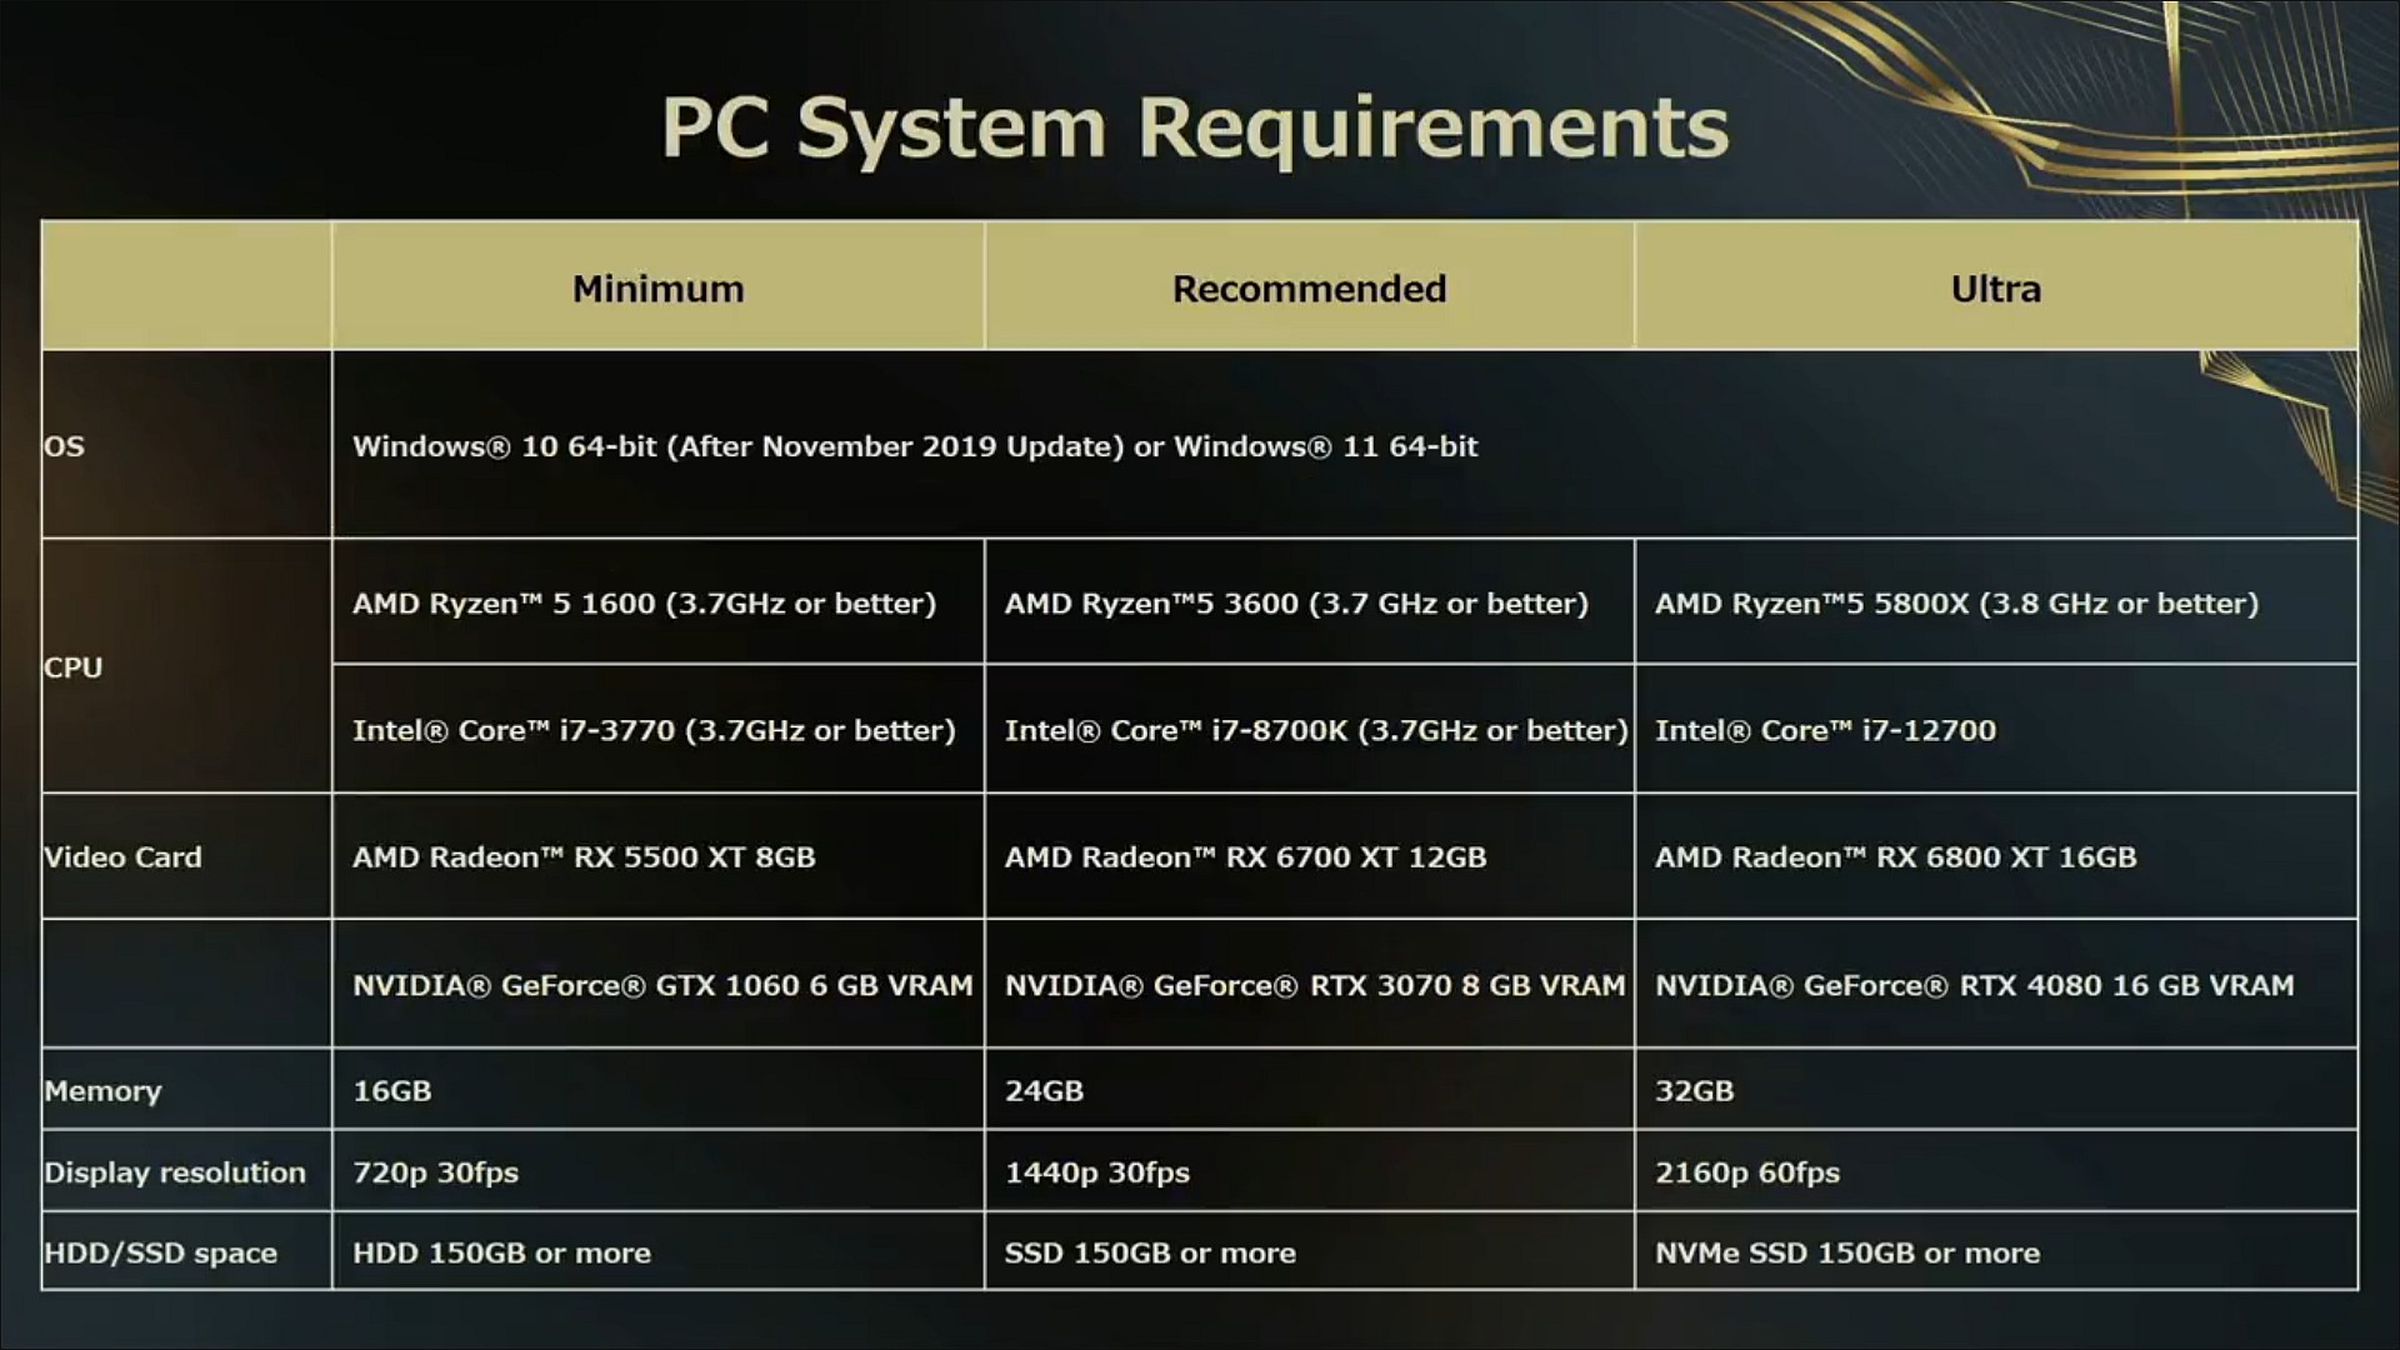 Forspoken’s PC system requirements... start out at 720p 30fps. That’s low.